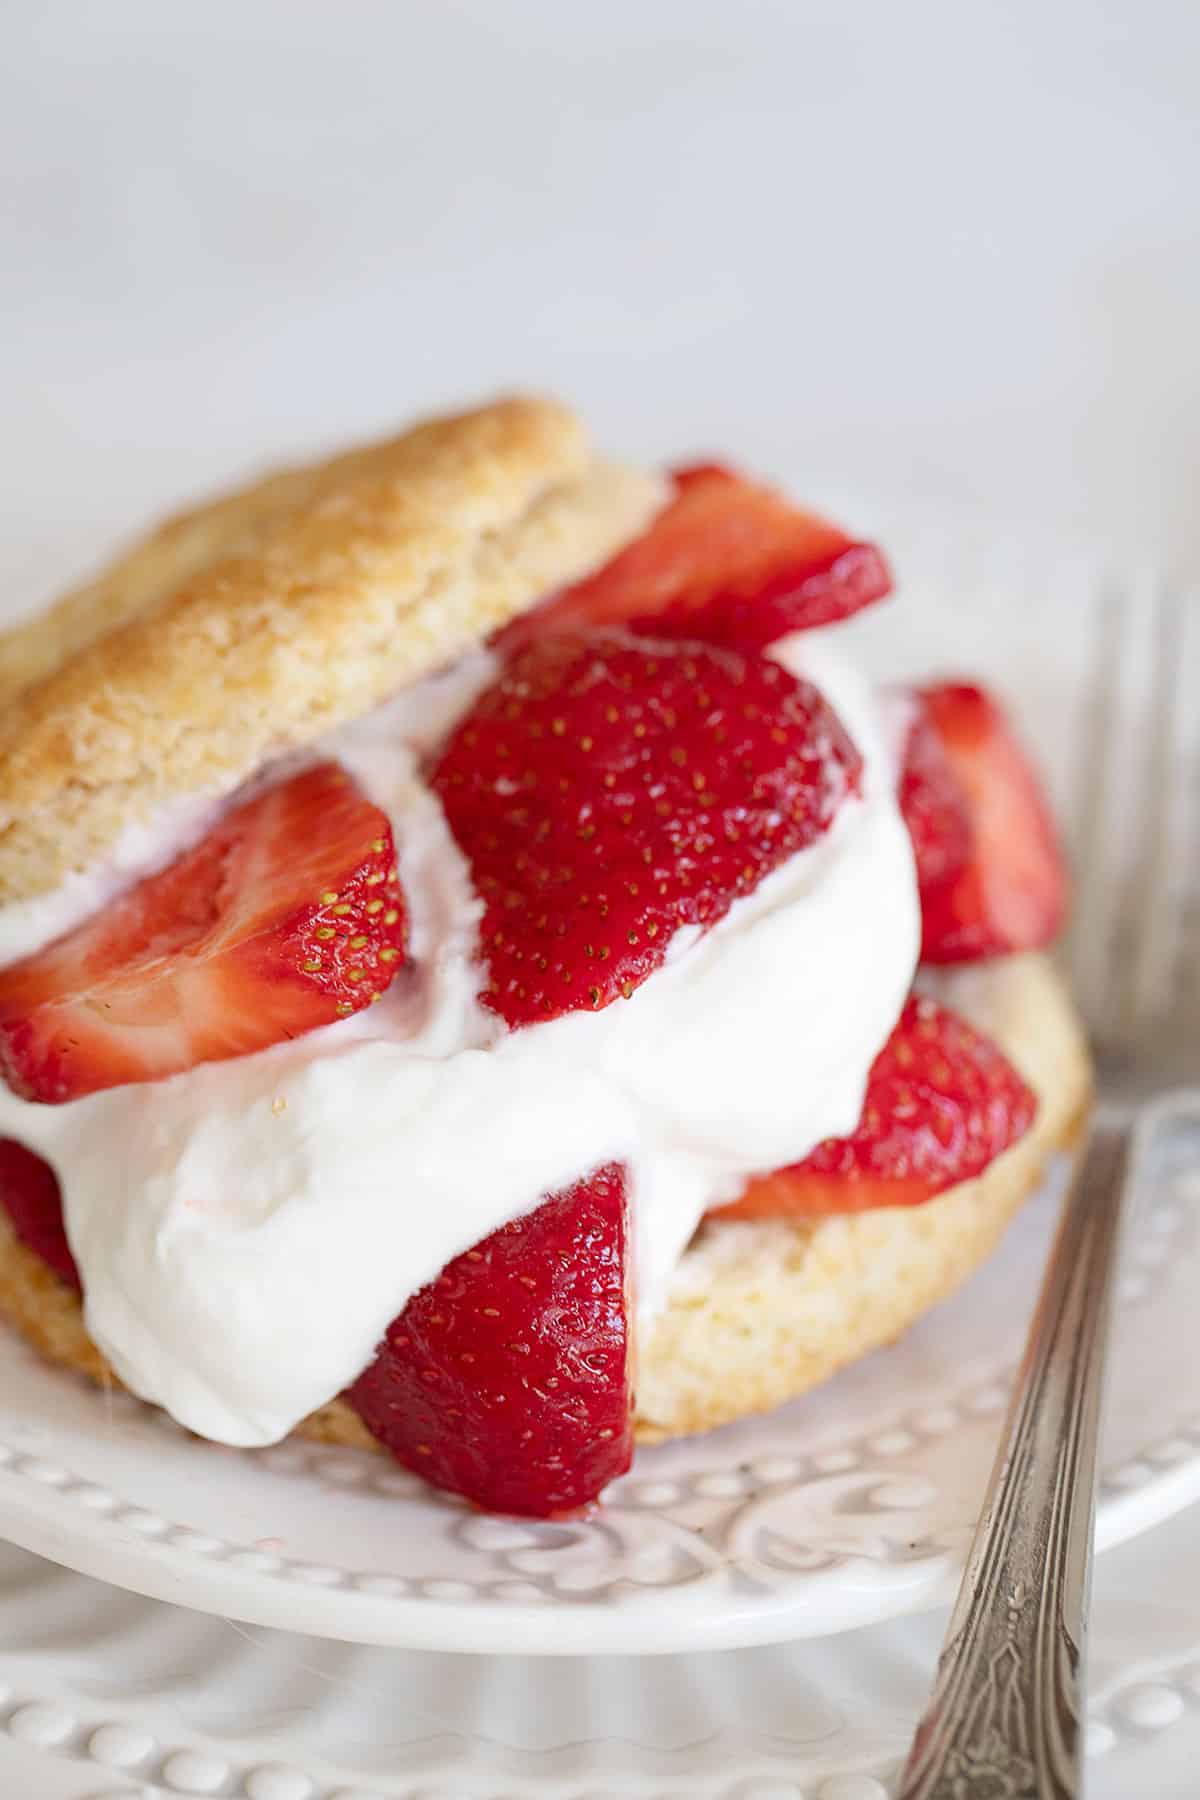 old-fashioned strawberry shortcake on plate with fork